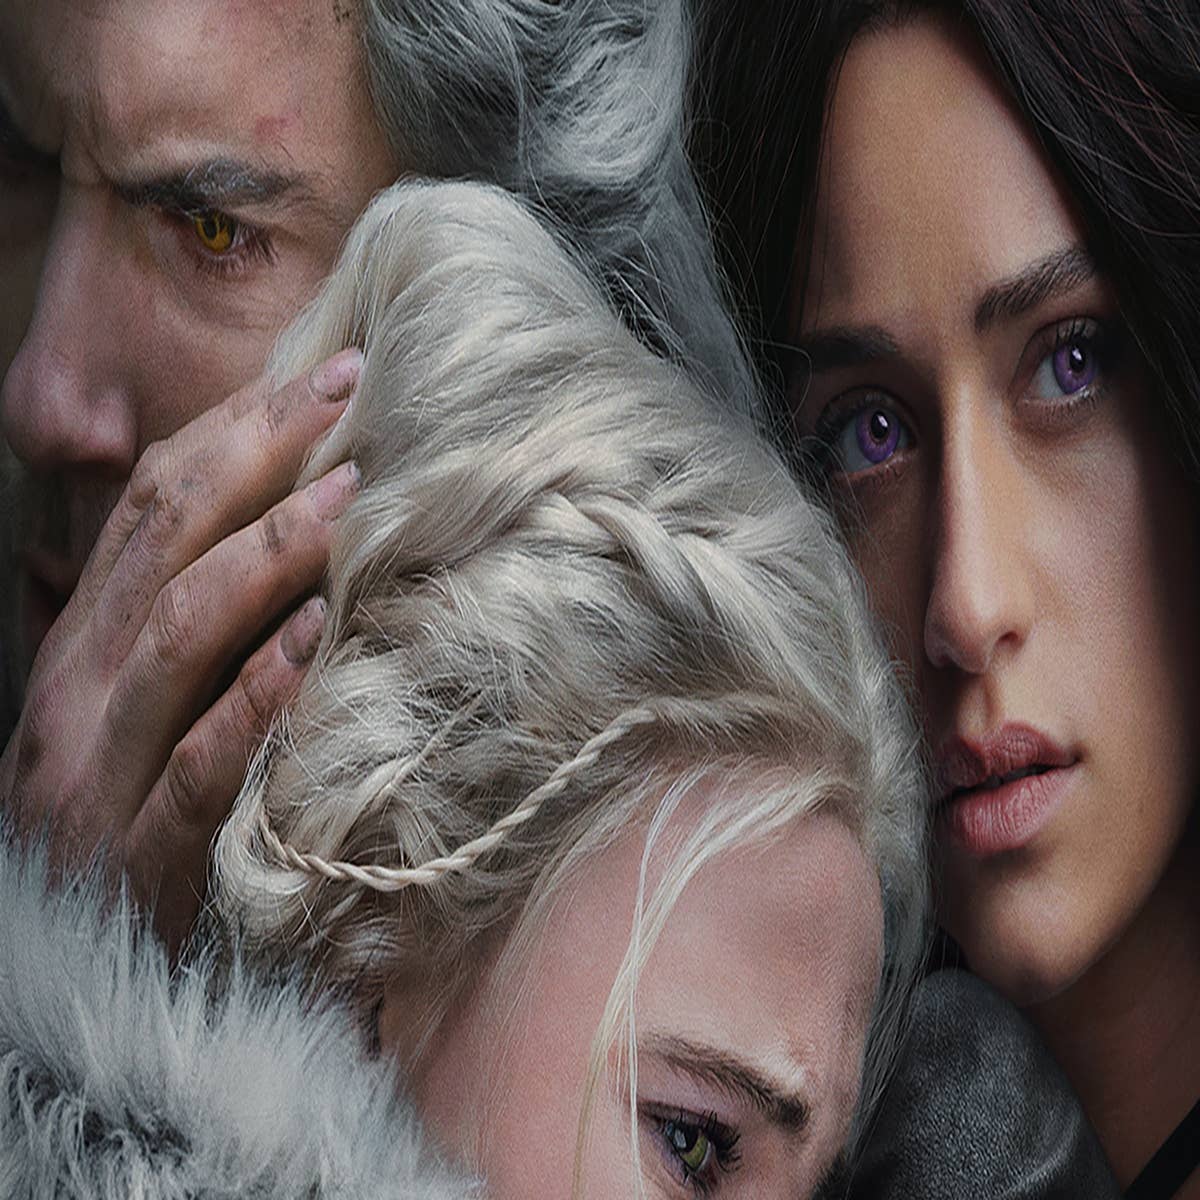 Netflix Announces 'The Witcher' Season 2 Cast, And Vesemir Is Missing